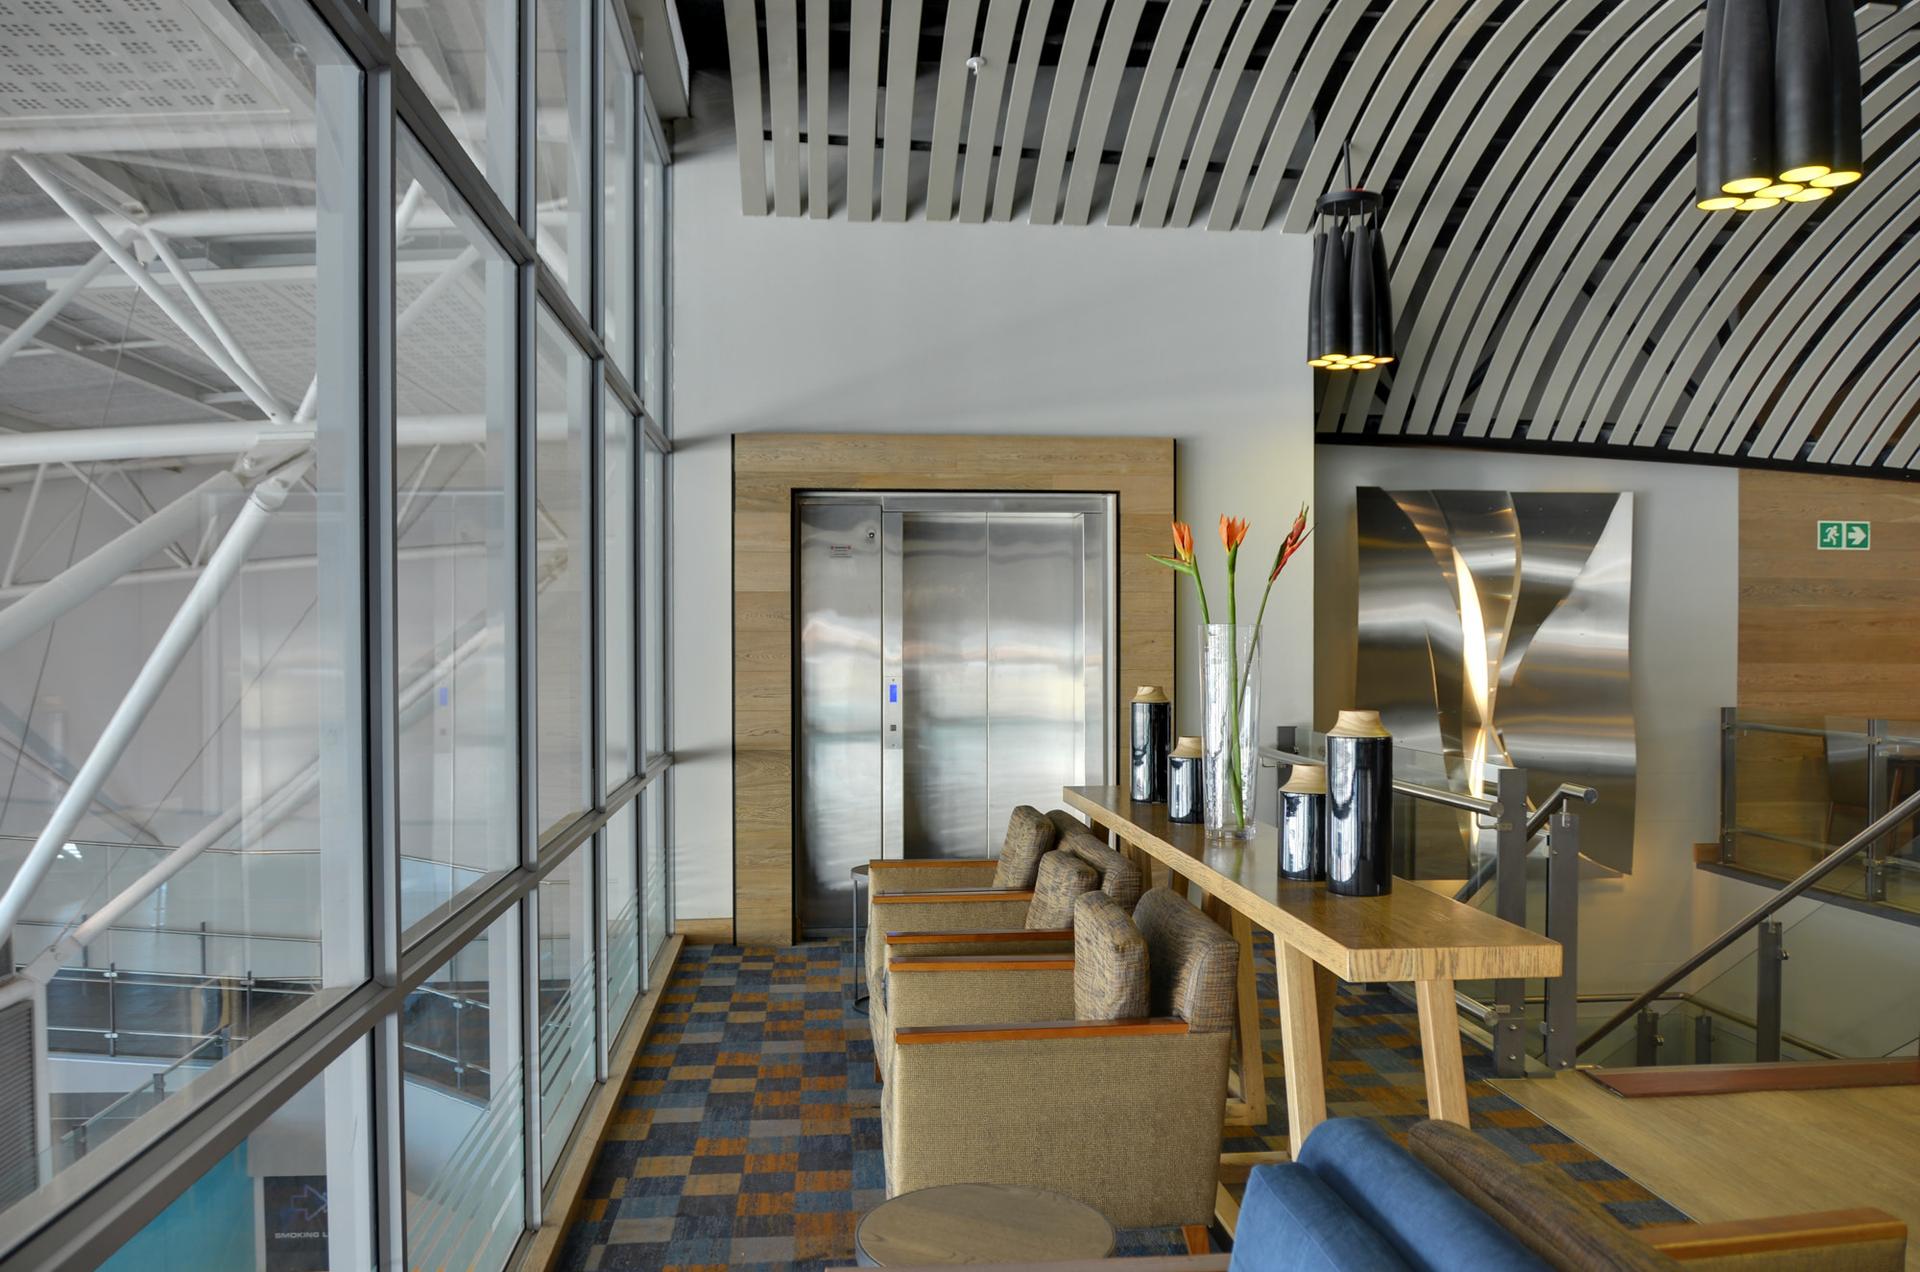 CPT International Sky Lounge image 4 of 15